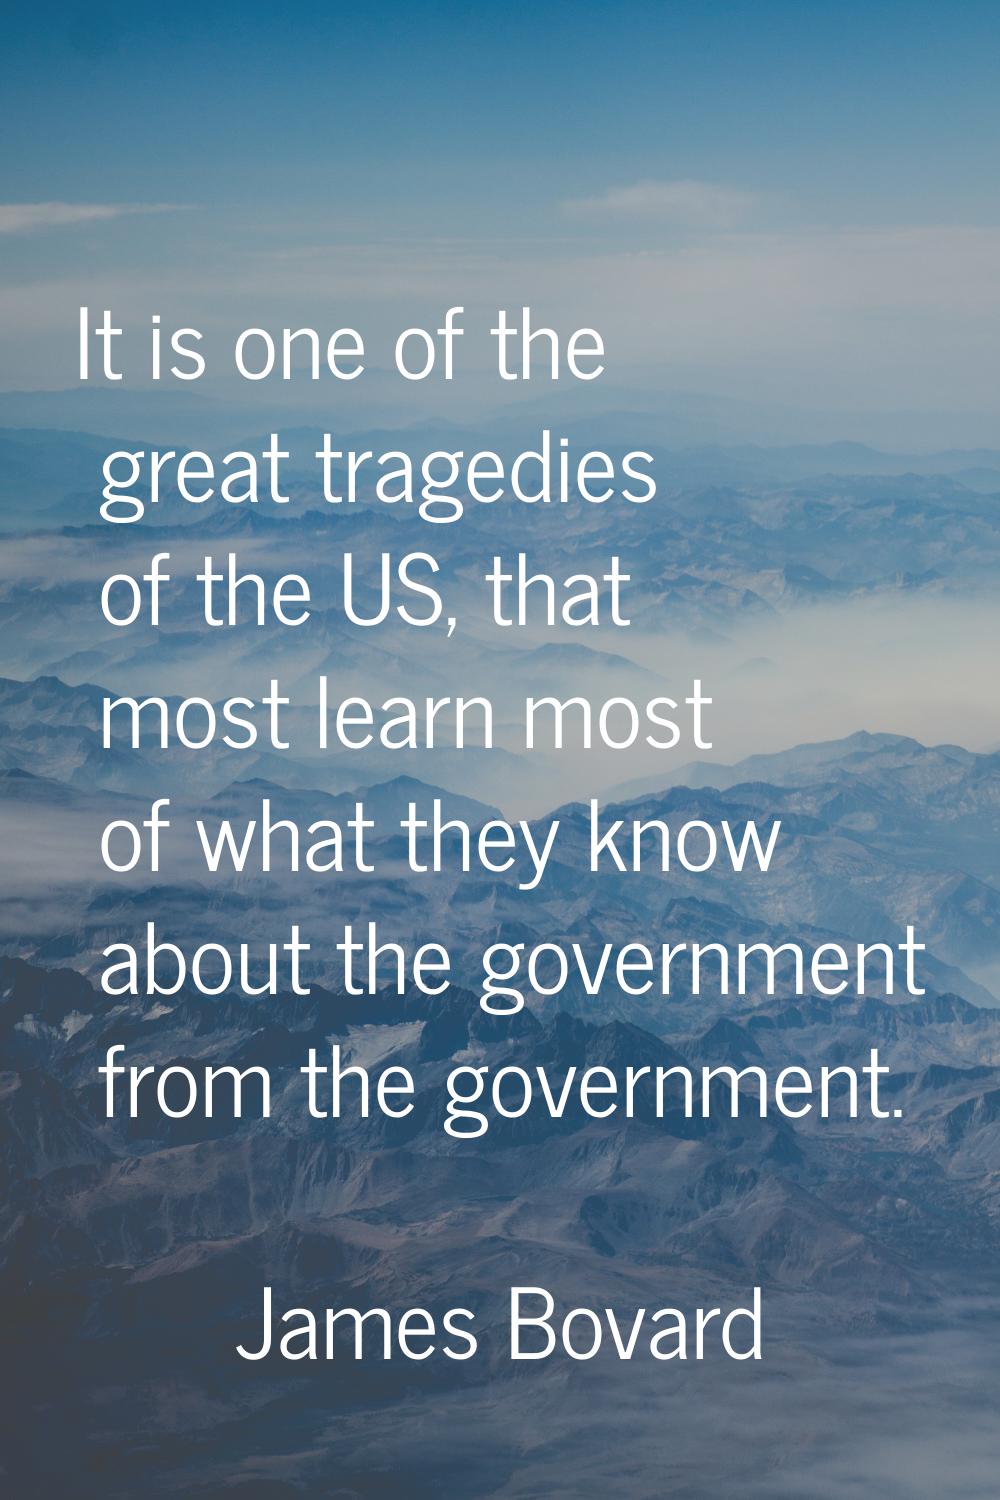 It is one of the great tragedies of the US, that most learn most of what they know about the govern